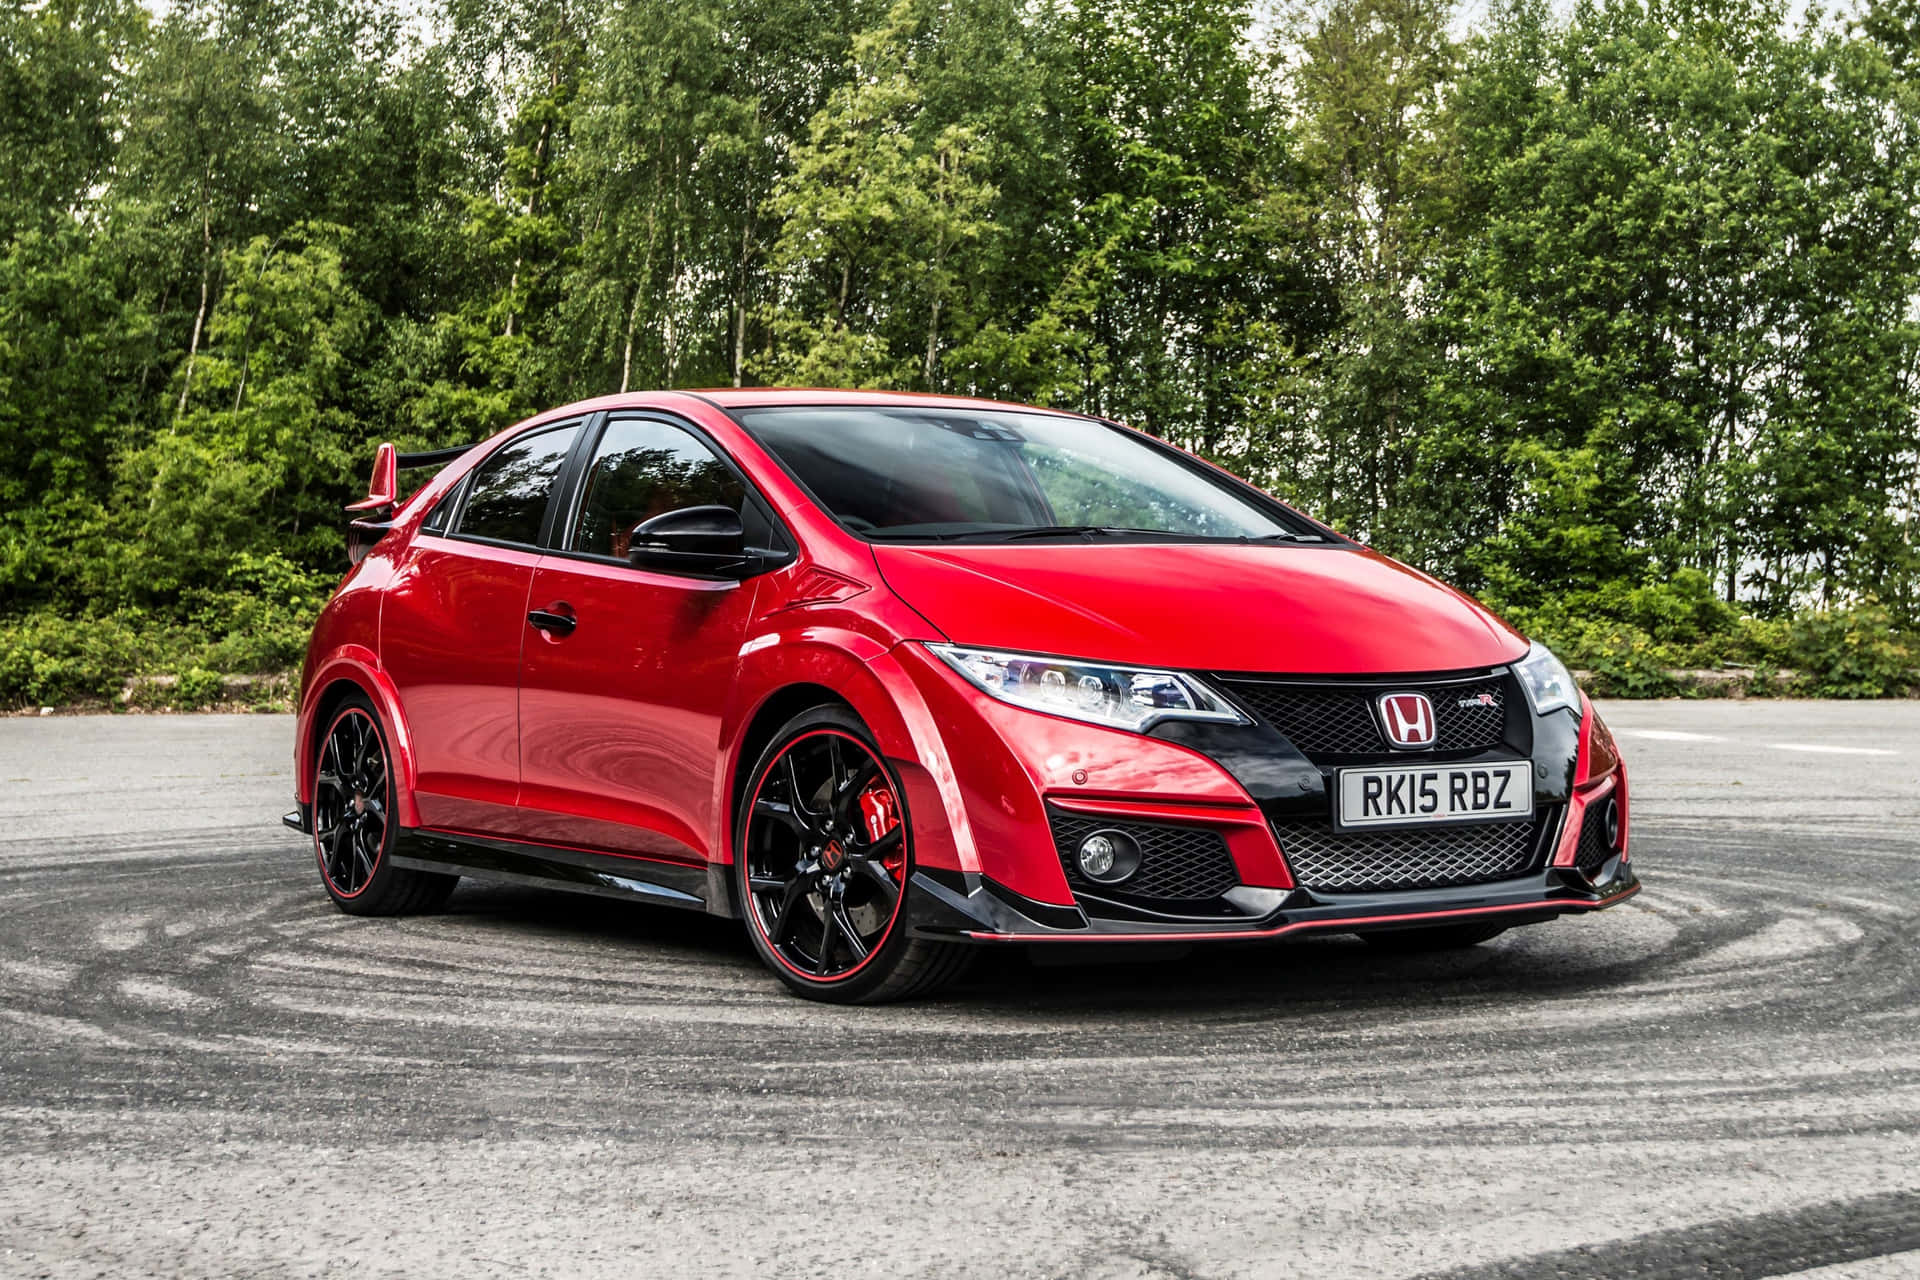 Get Set For High-Octane Driving With the Honda Civic Type R Wallpaper